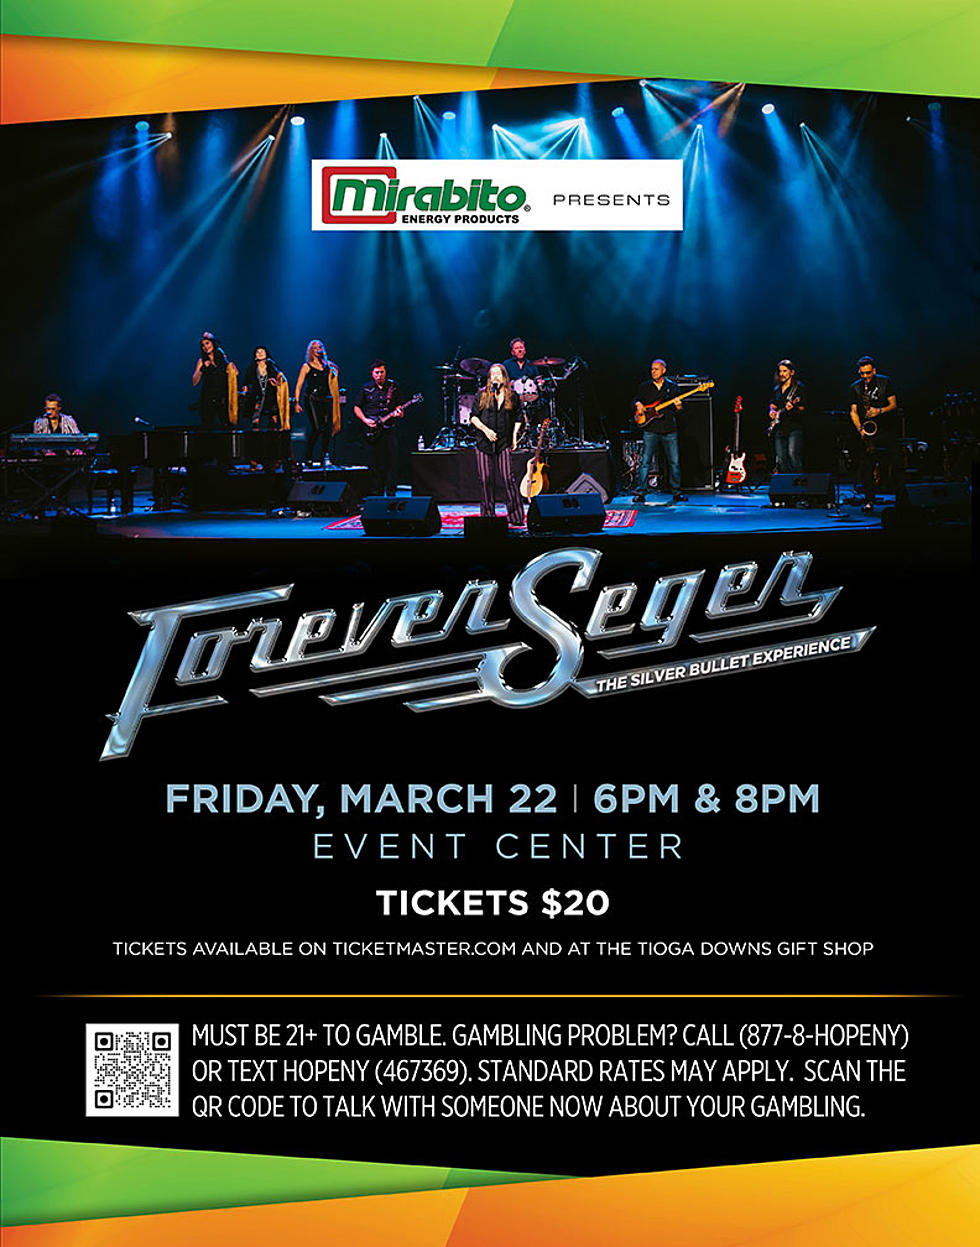 Enter To Win Tickets To See Forever Seger – The Silver Bullet Experience